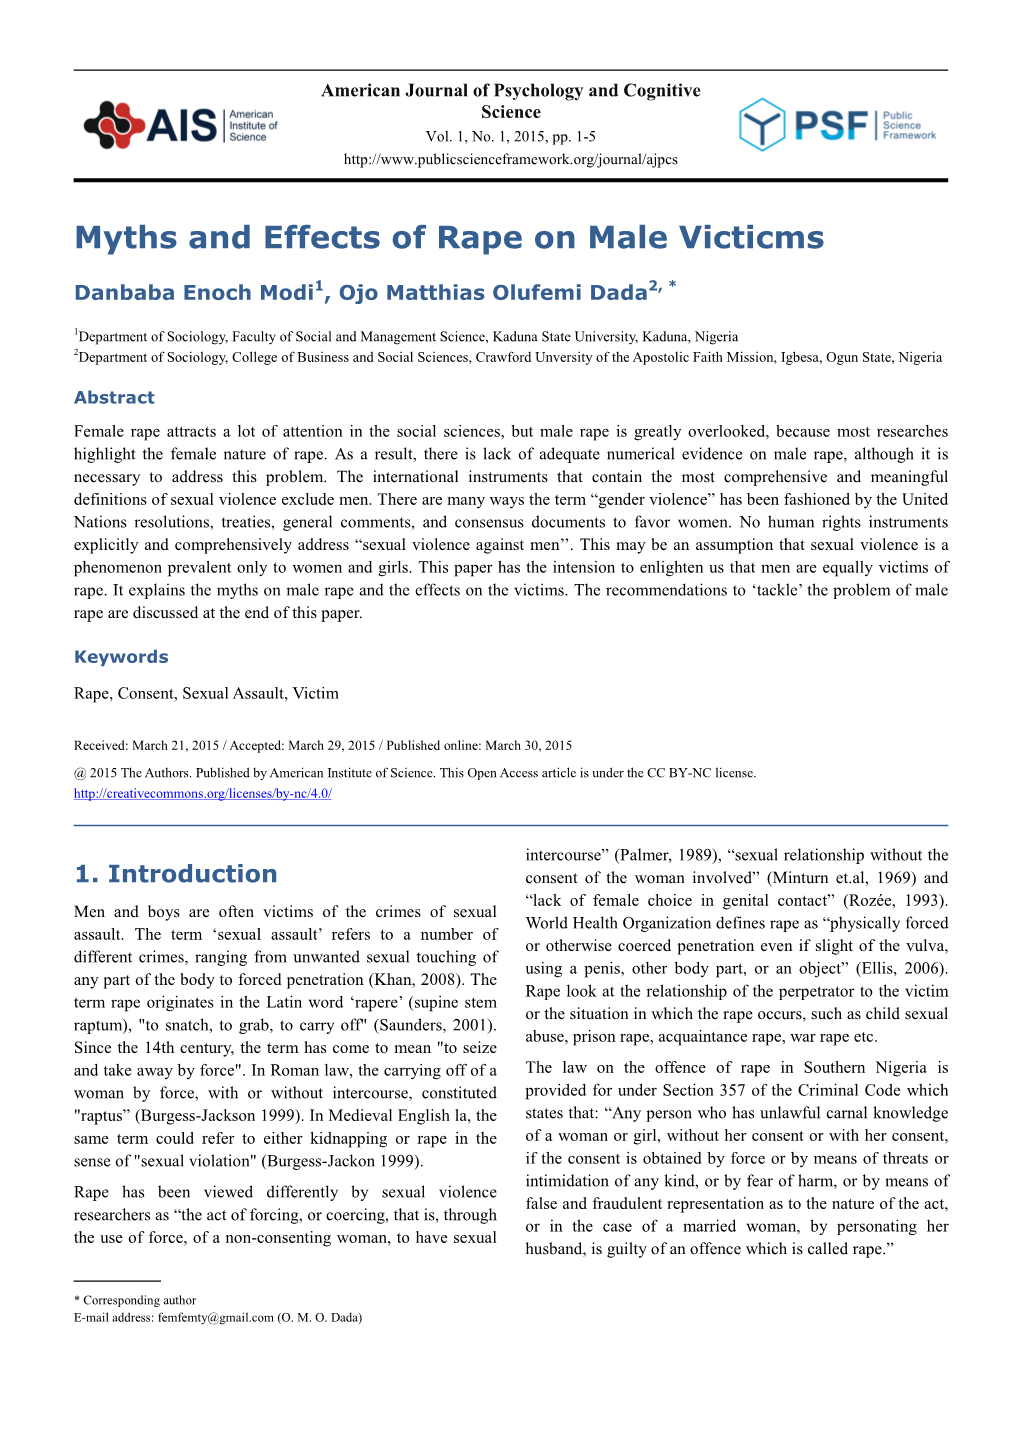 Myths and Effects of Rape on Male Victicms